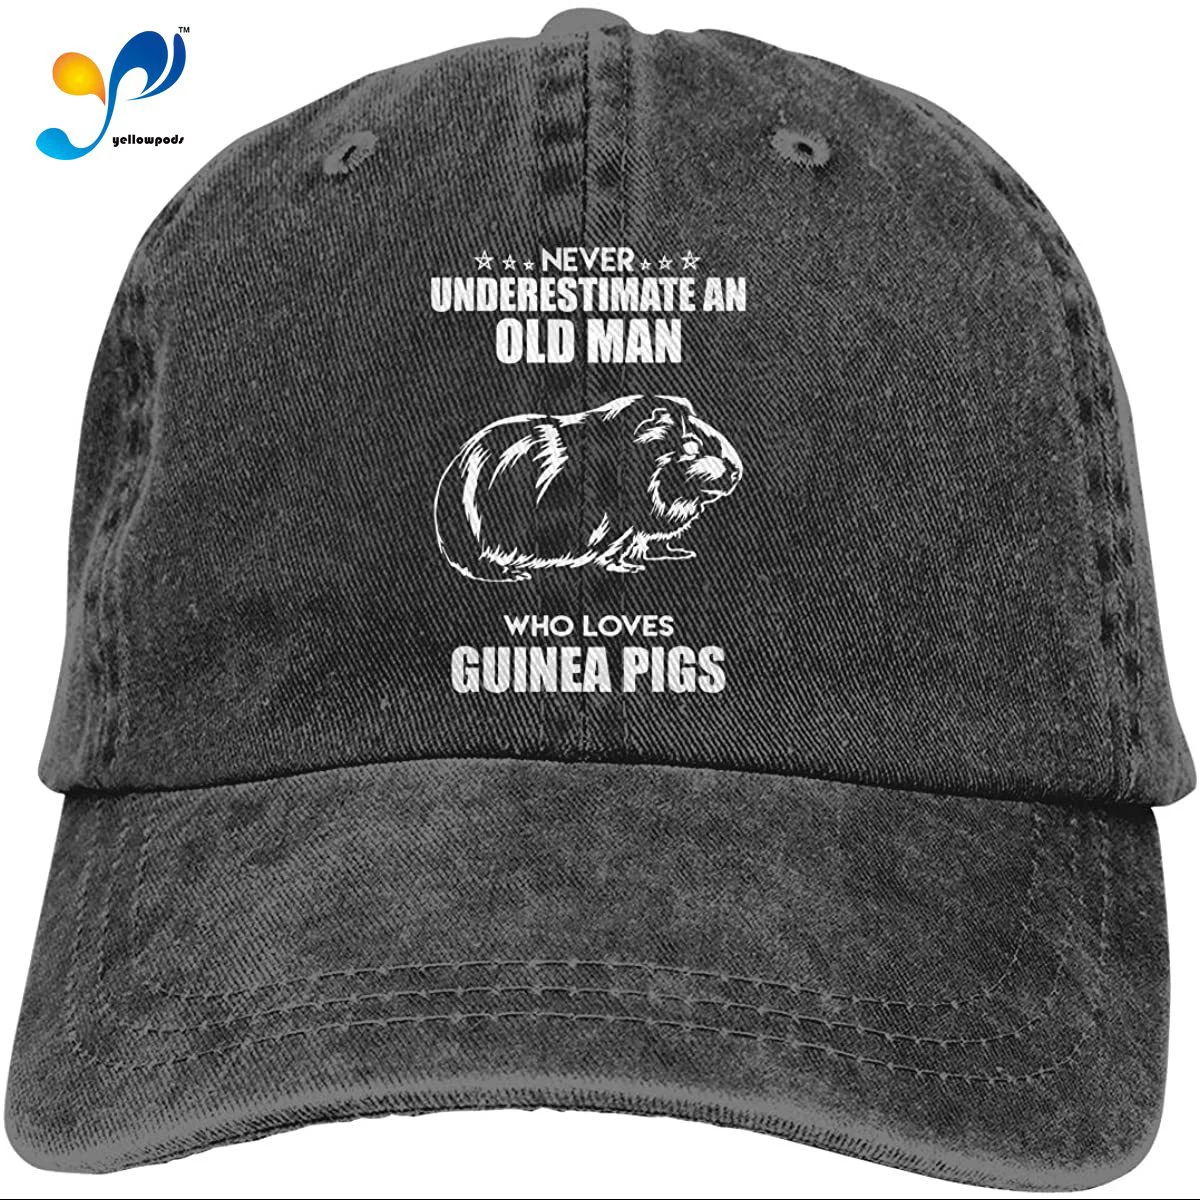 

Old Man Loves Guinea Pigs Vintage Washed Twill Baseball Caps Adjustable Hat Funny Humor Irony Graphics Of Adult Gift Black